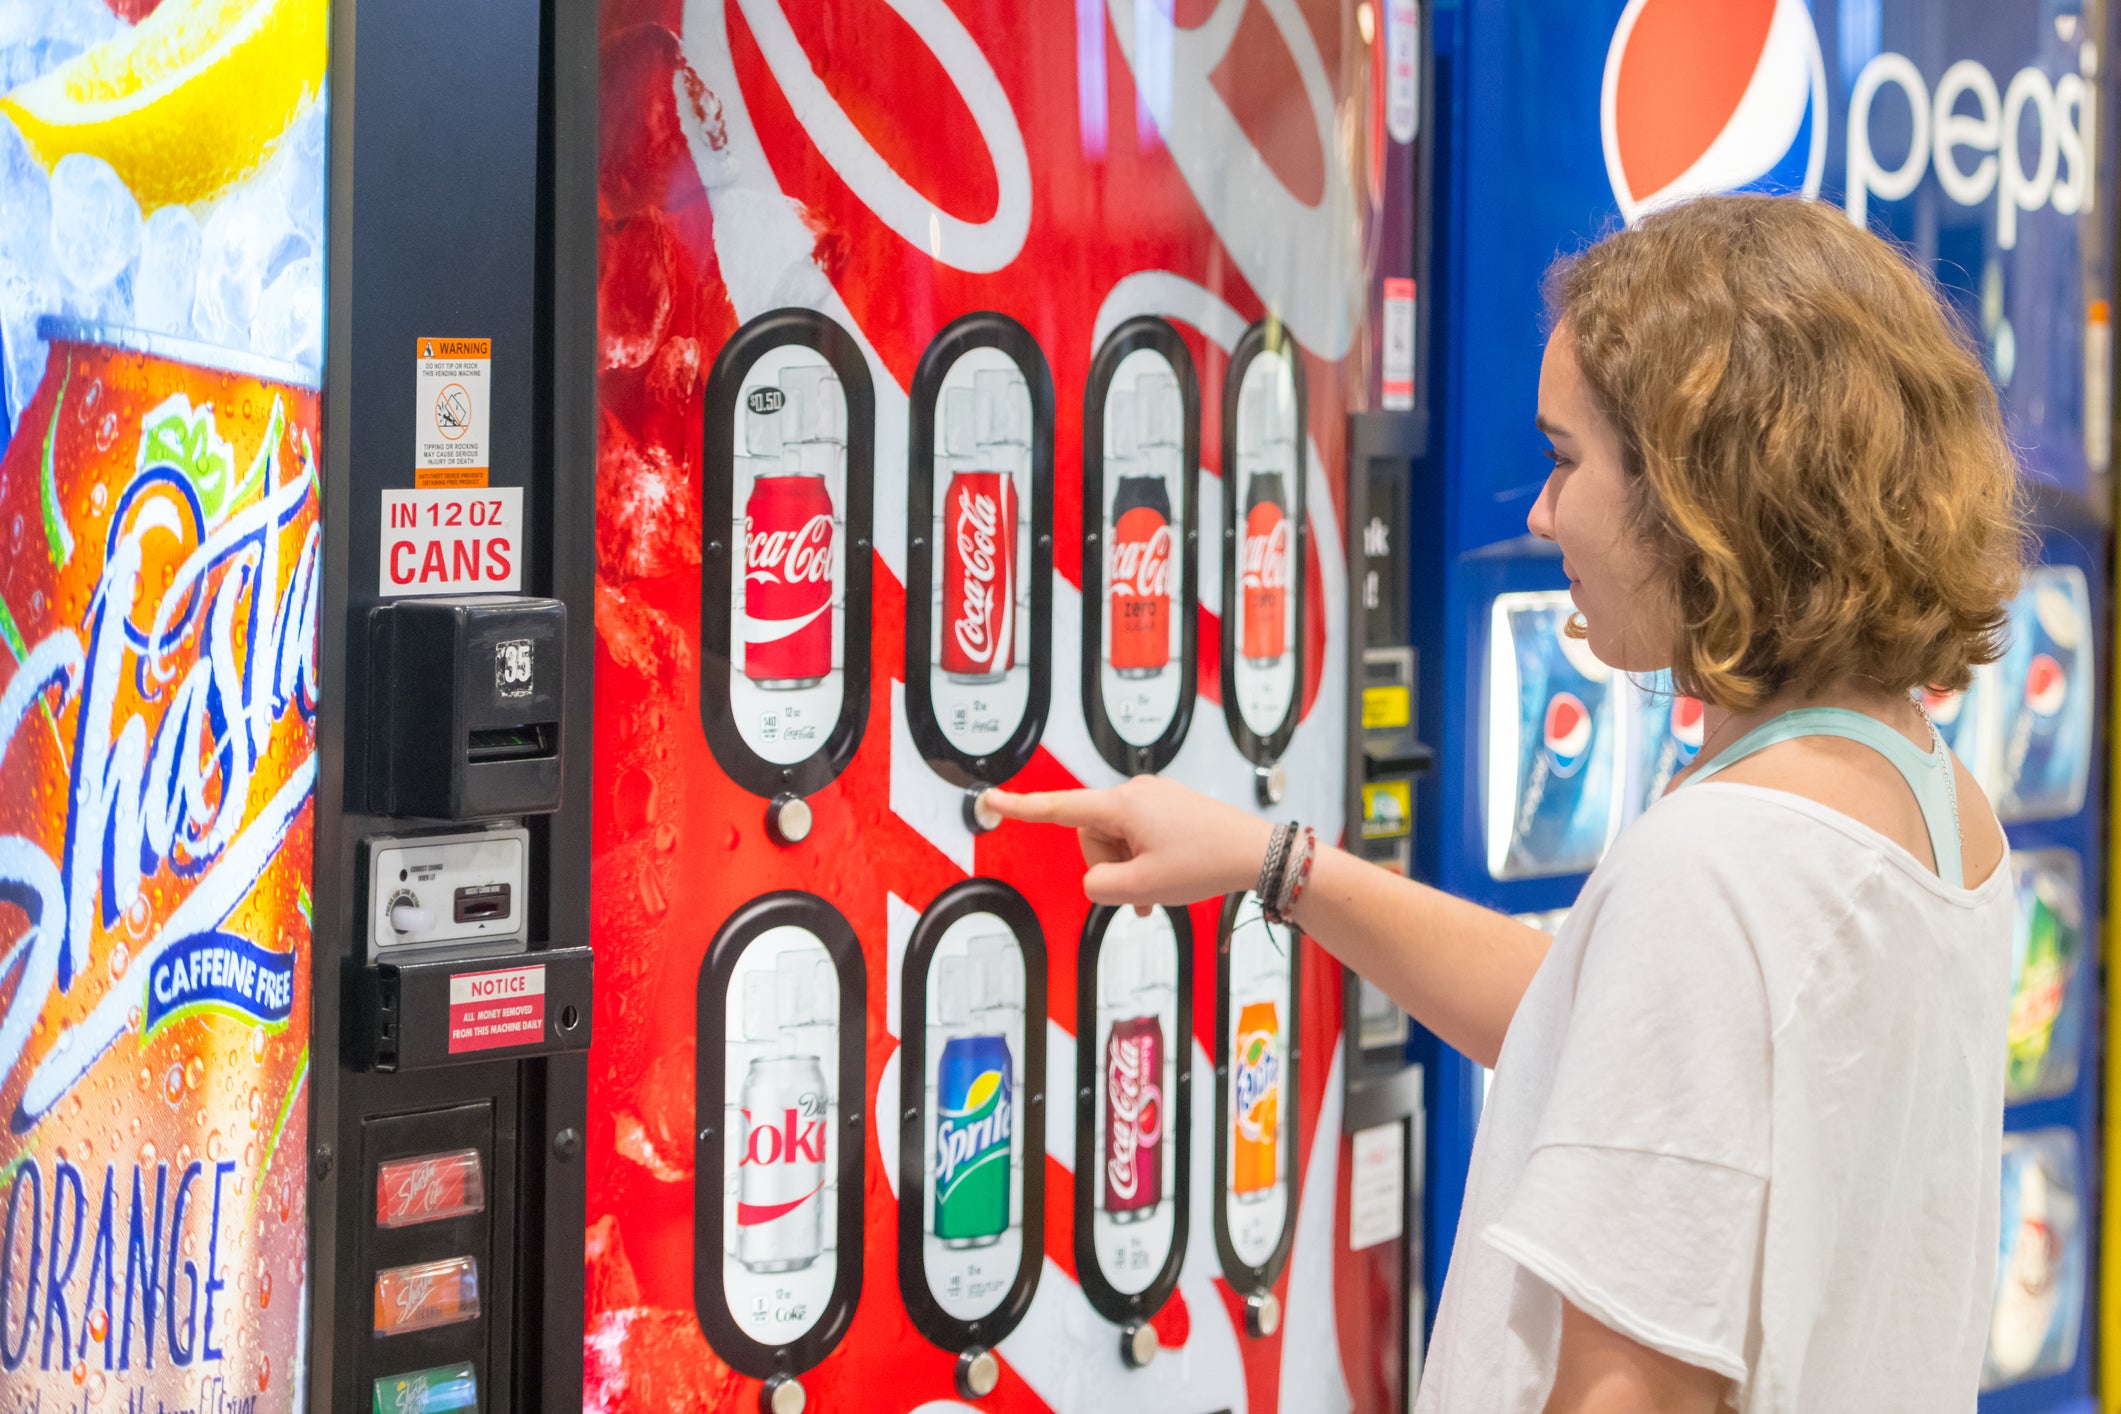 Supply chain issues and other increased costs have led to a big jump in the price of snacks from vending machines